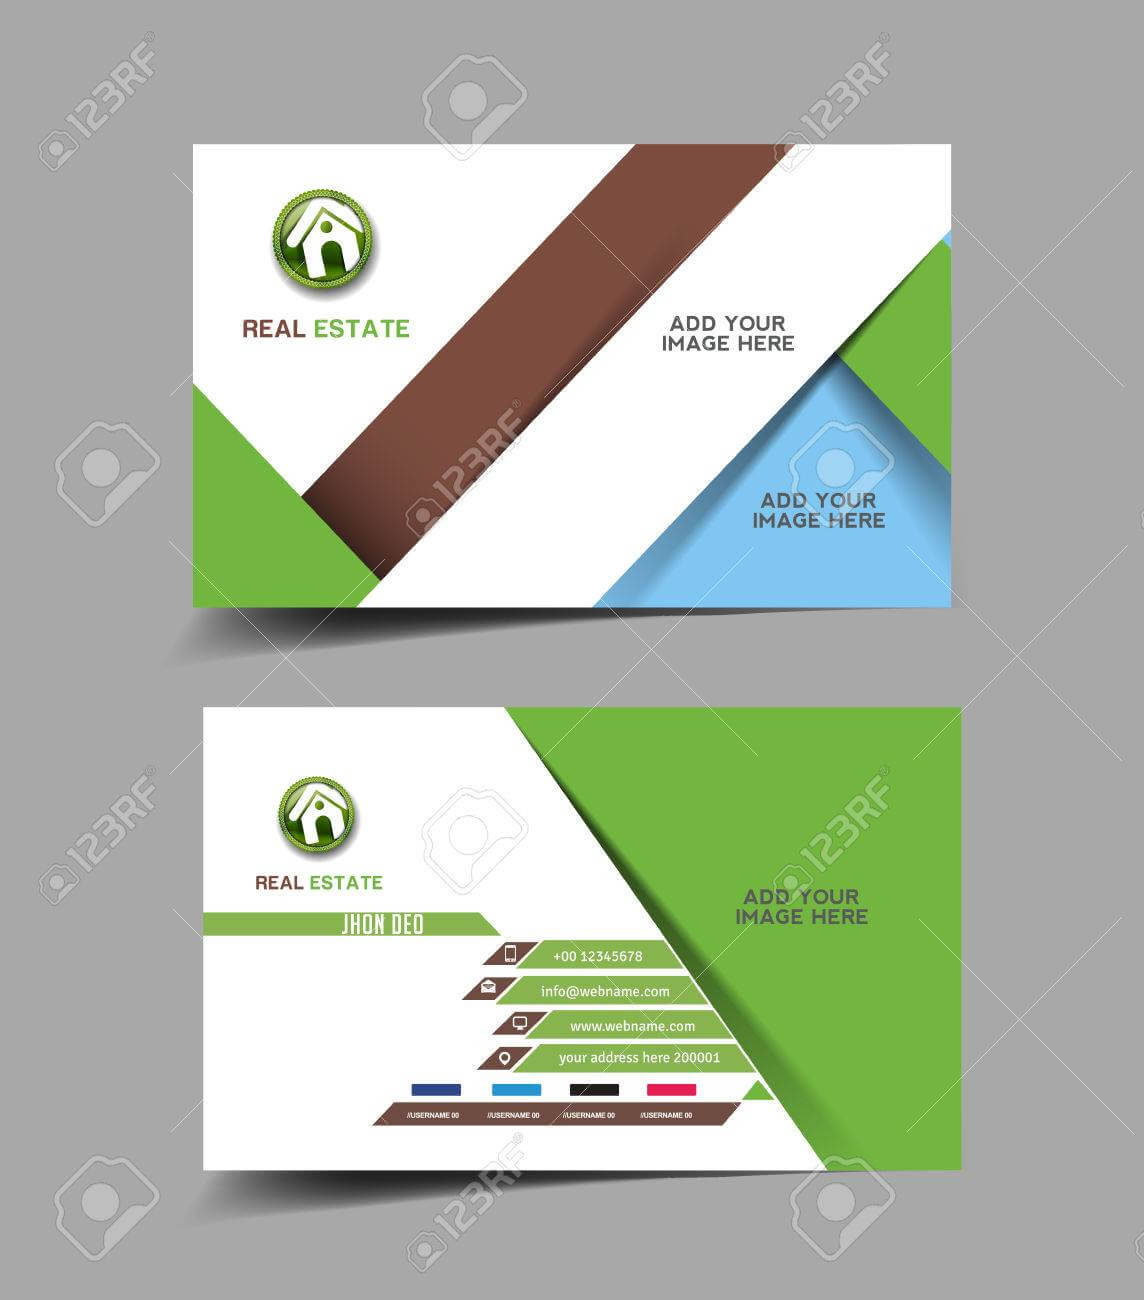 Real Estate Agent Business Card Set Template Throughout Real Estate Agent Business Card Template